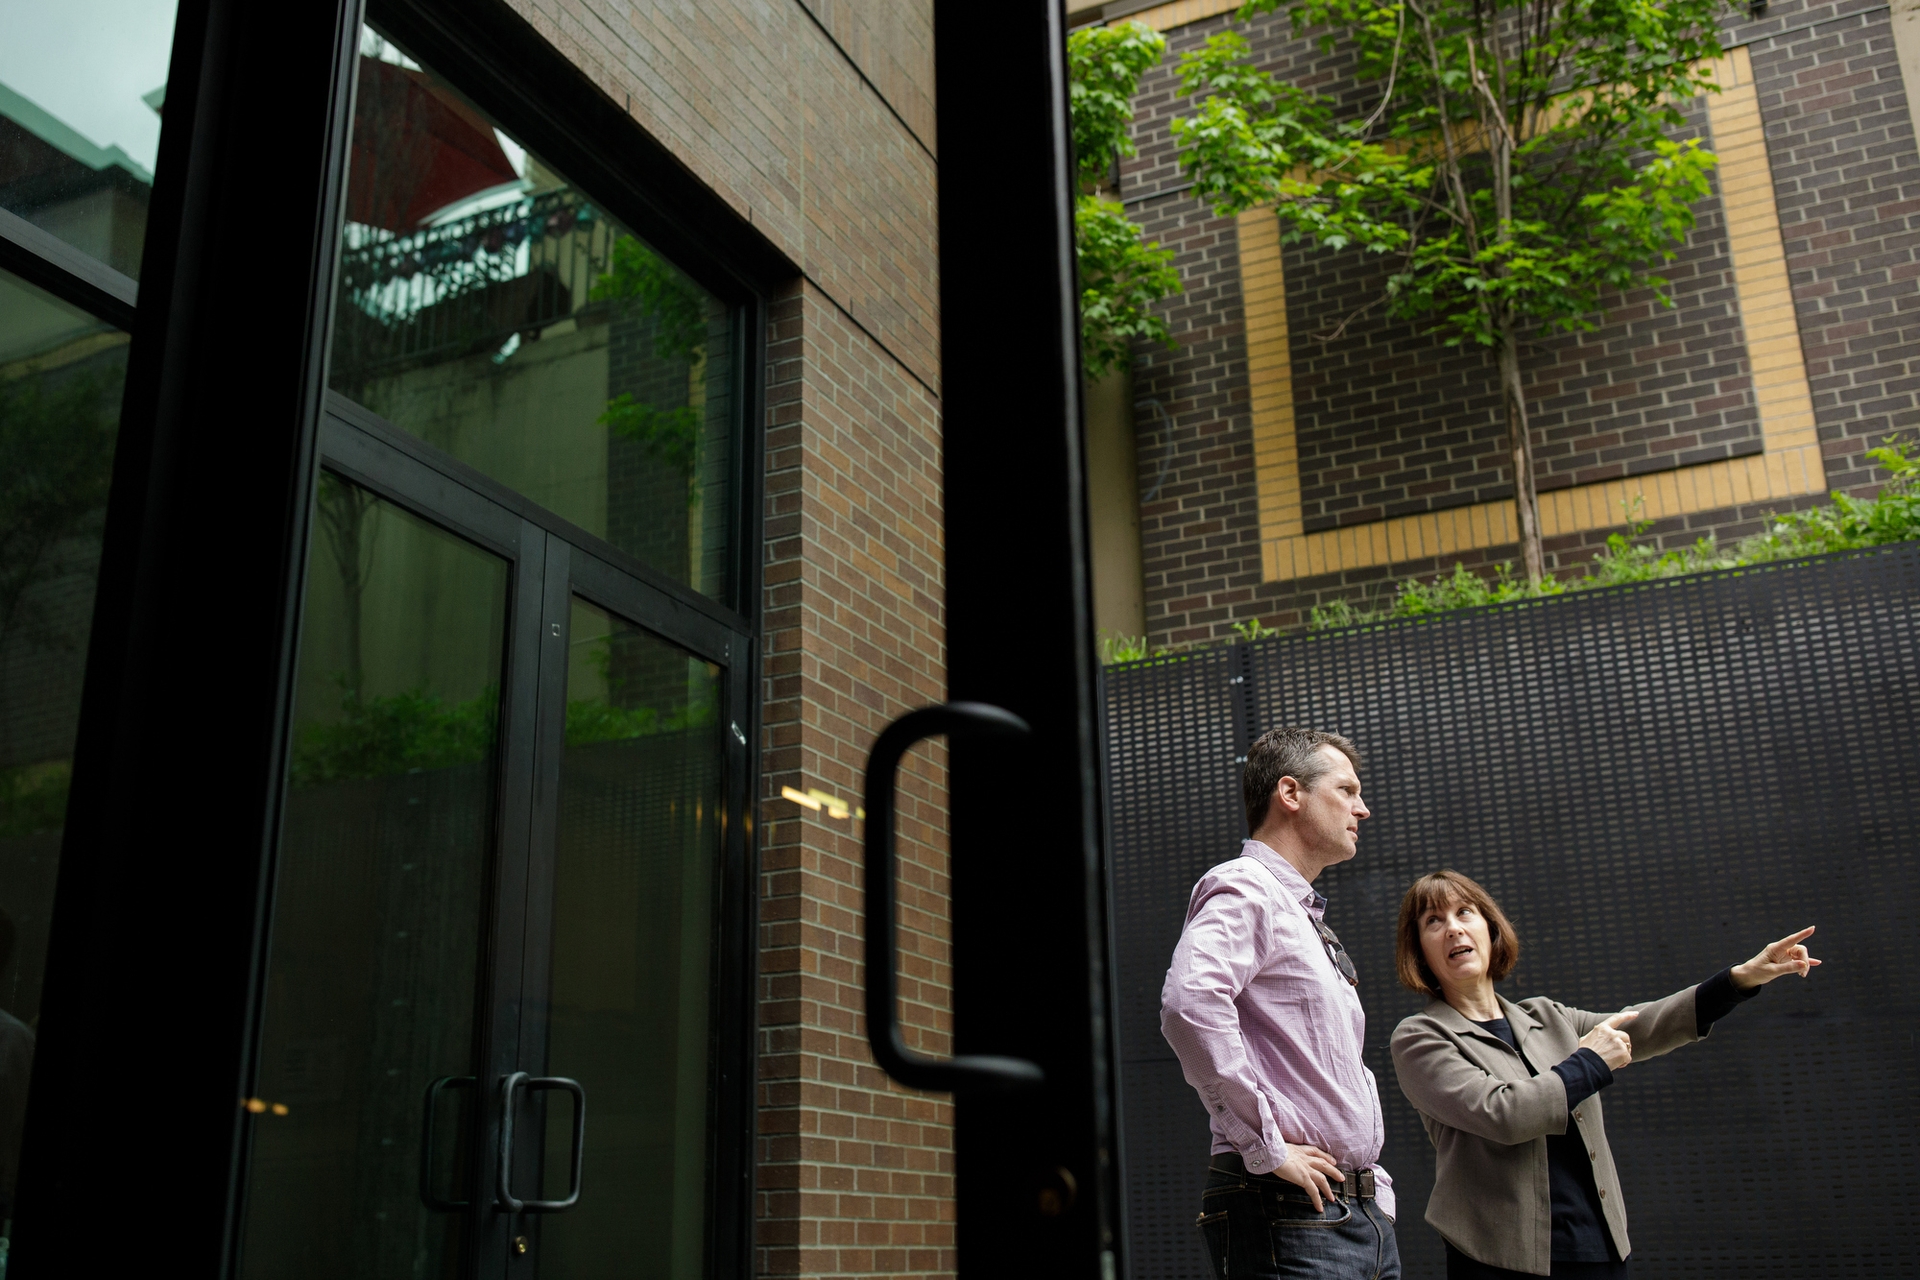 Seen through a glass door, a man and a woman stand in an open-air courtyard. The woman points to something to the right. A tree and a brick wall are at the top of the image.